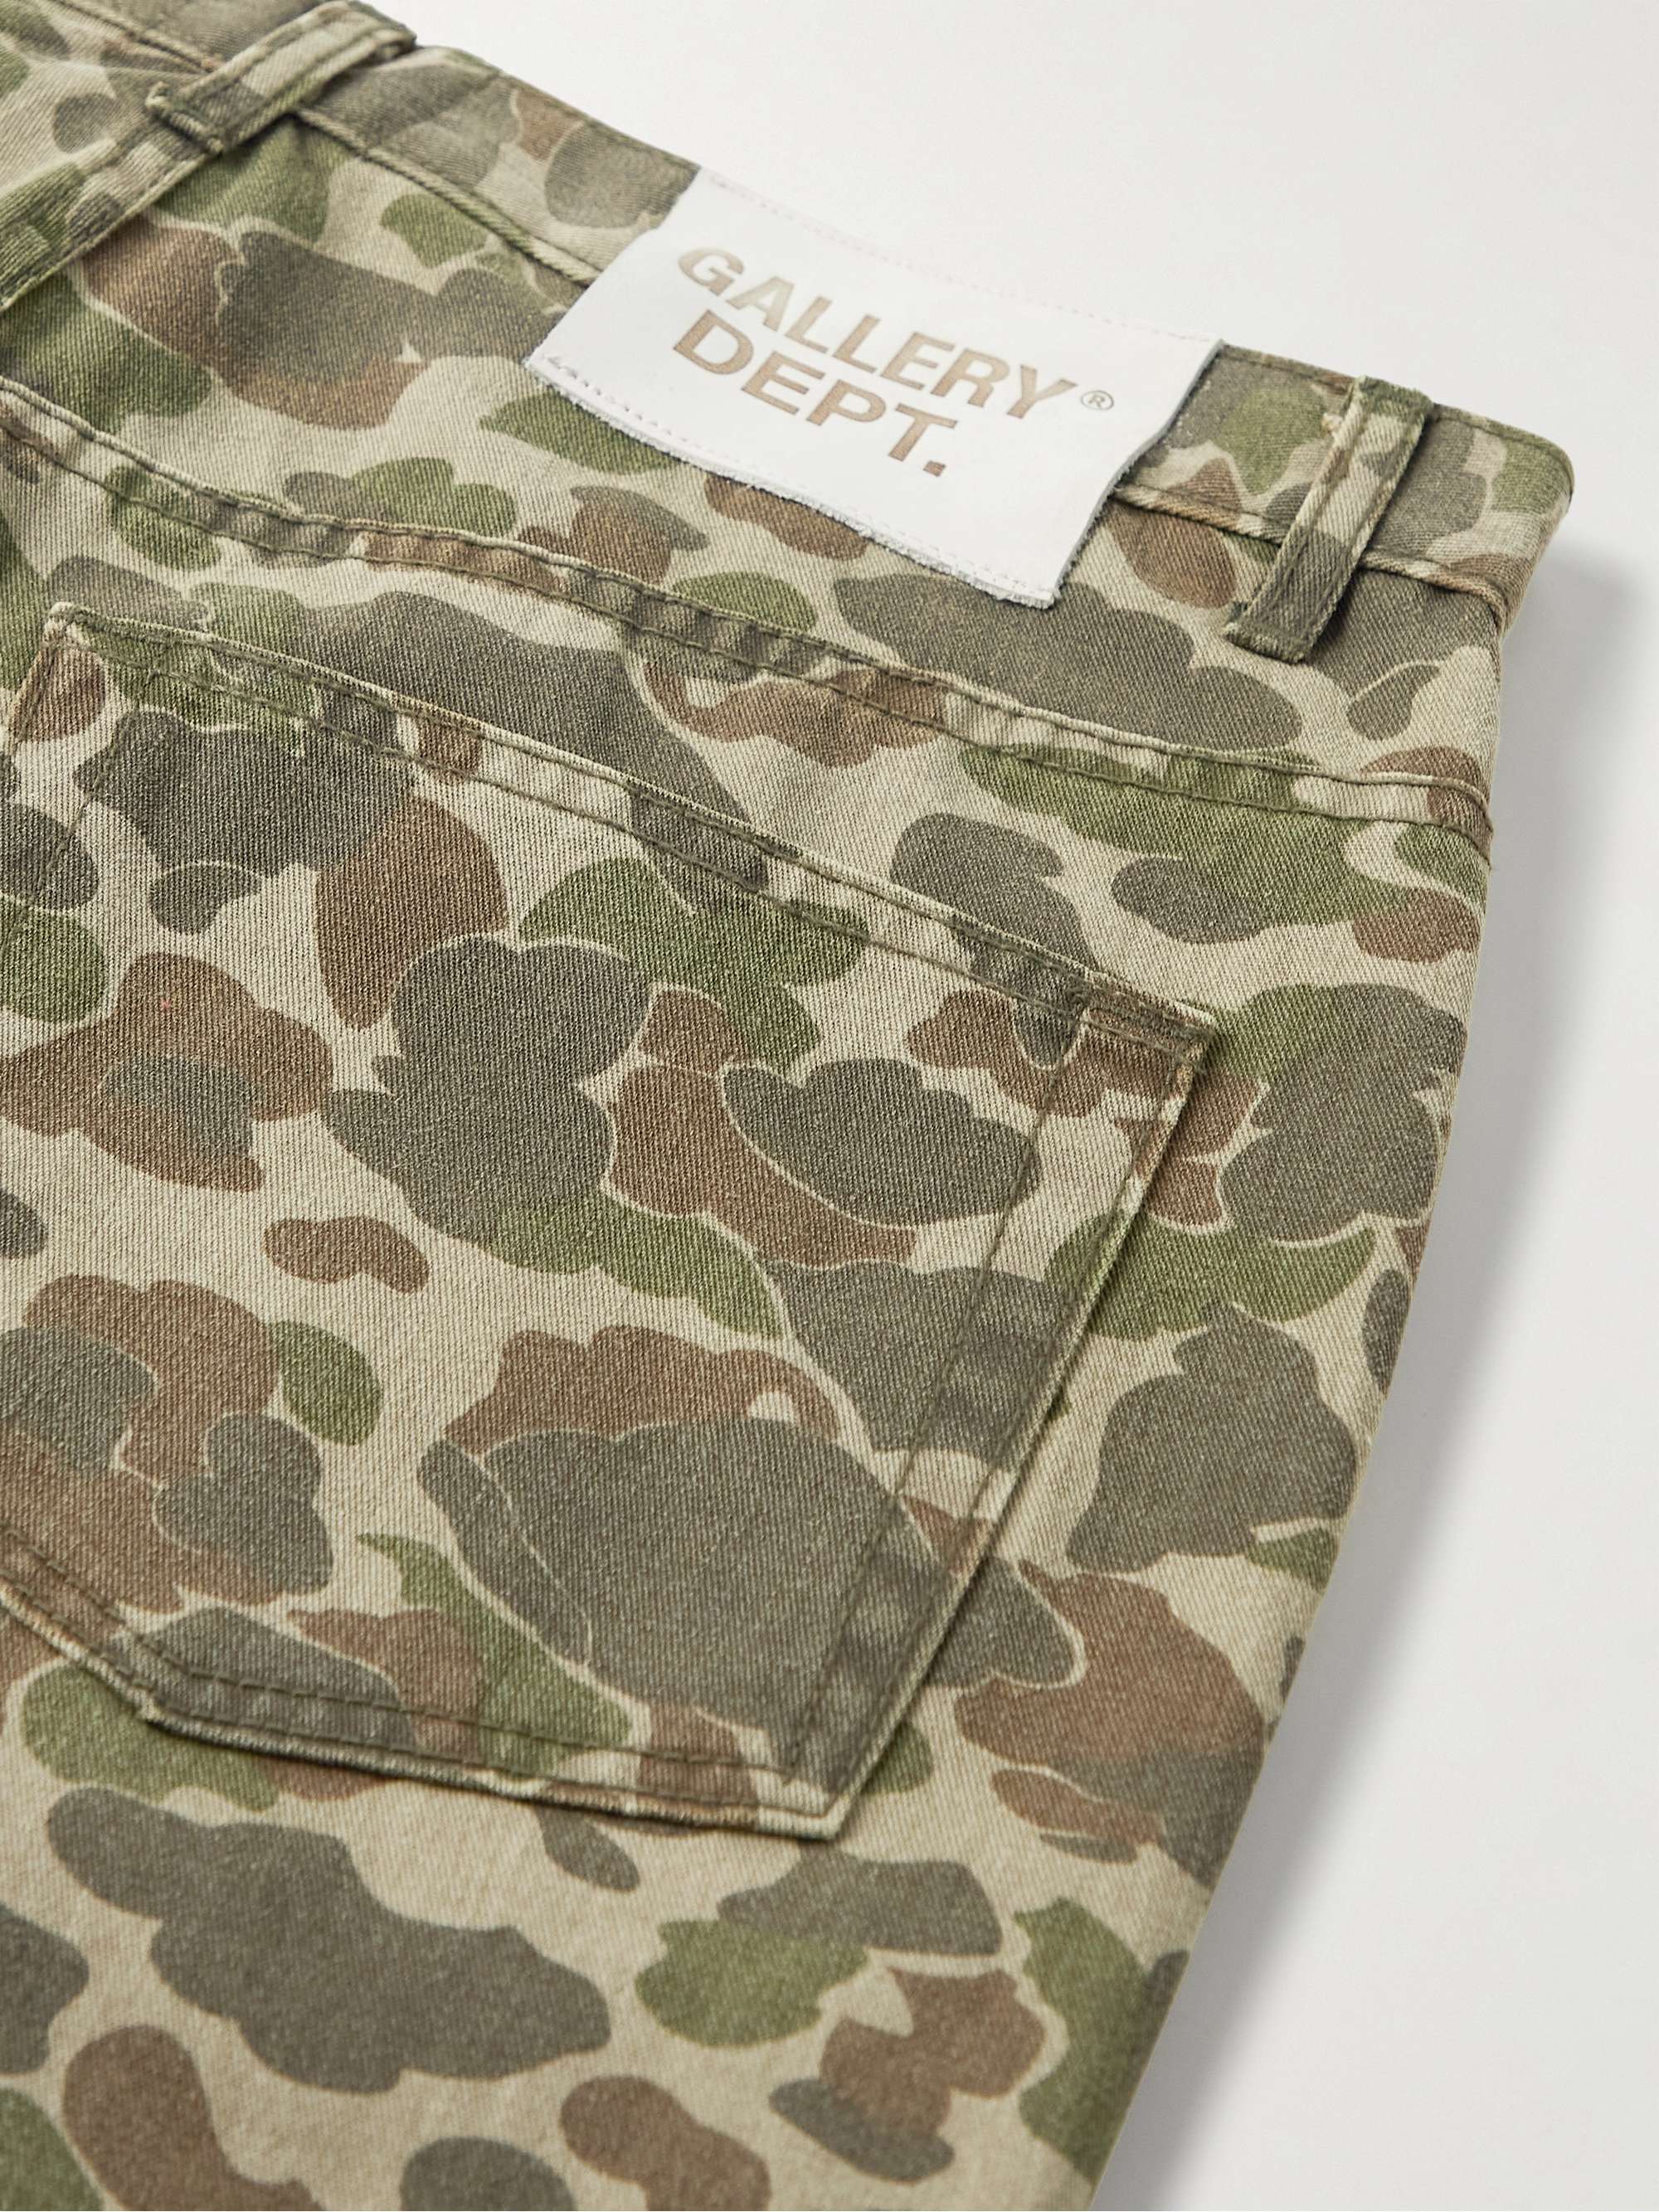 GALLERY DEPT. Road Straight-Leg Camouflage-Print Cotton-Blend Twill Trousers